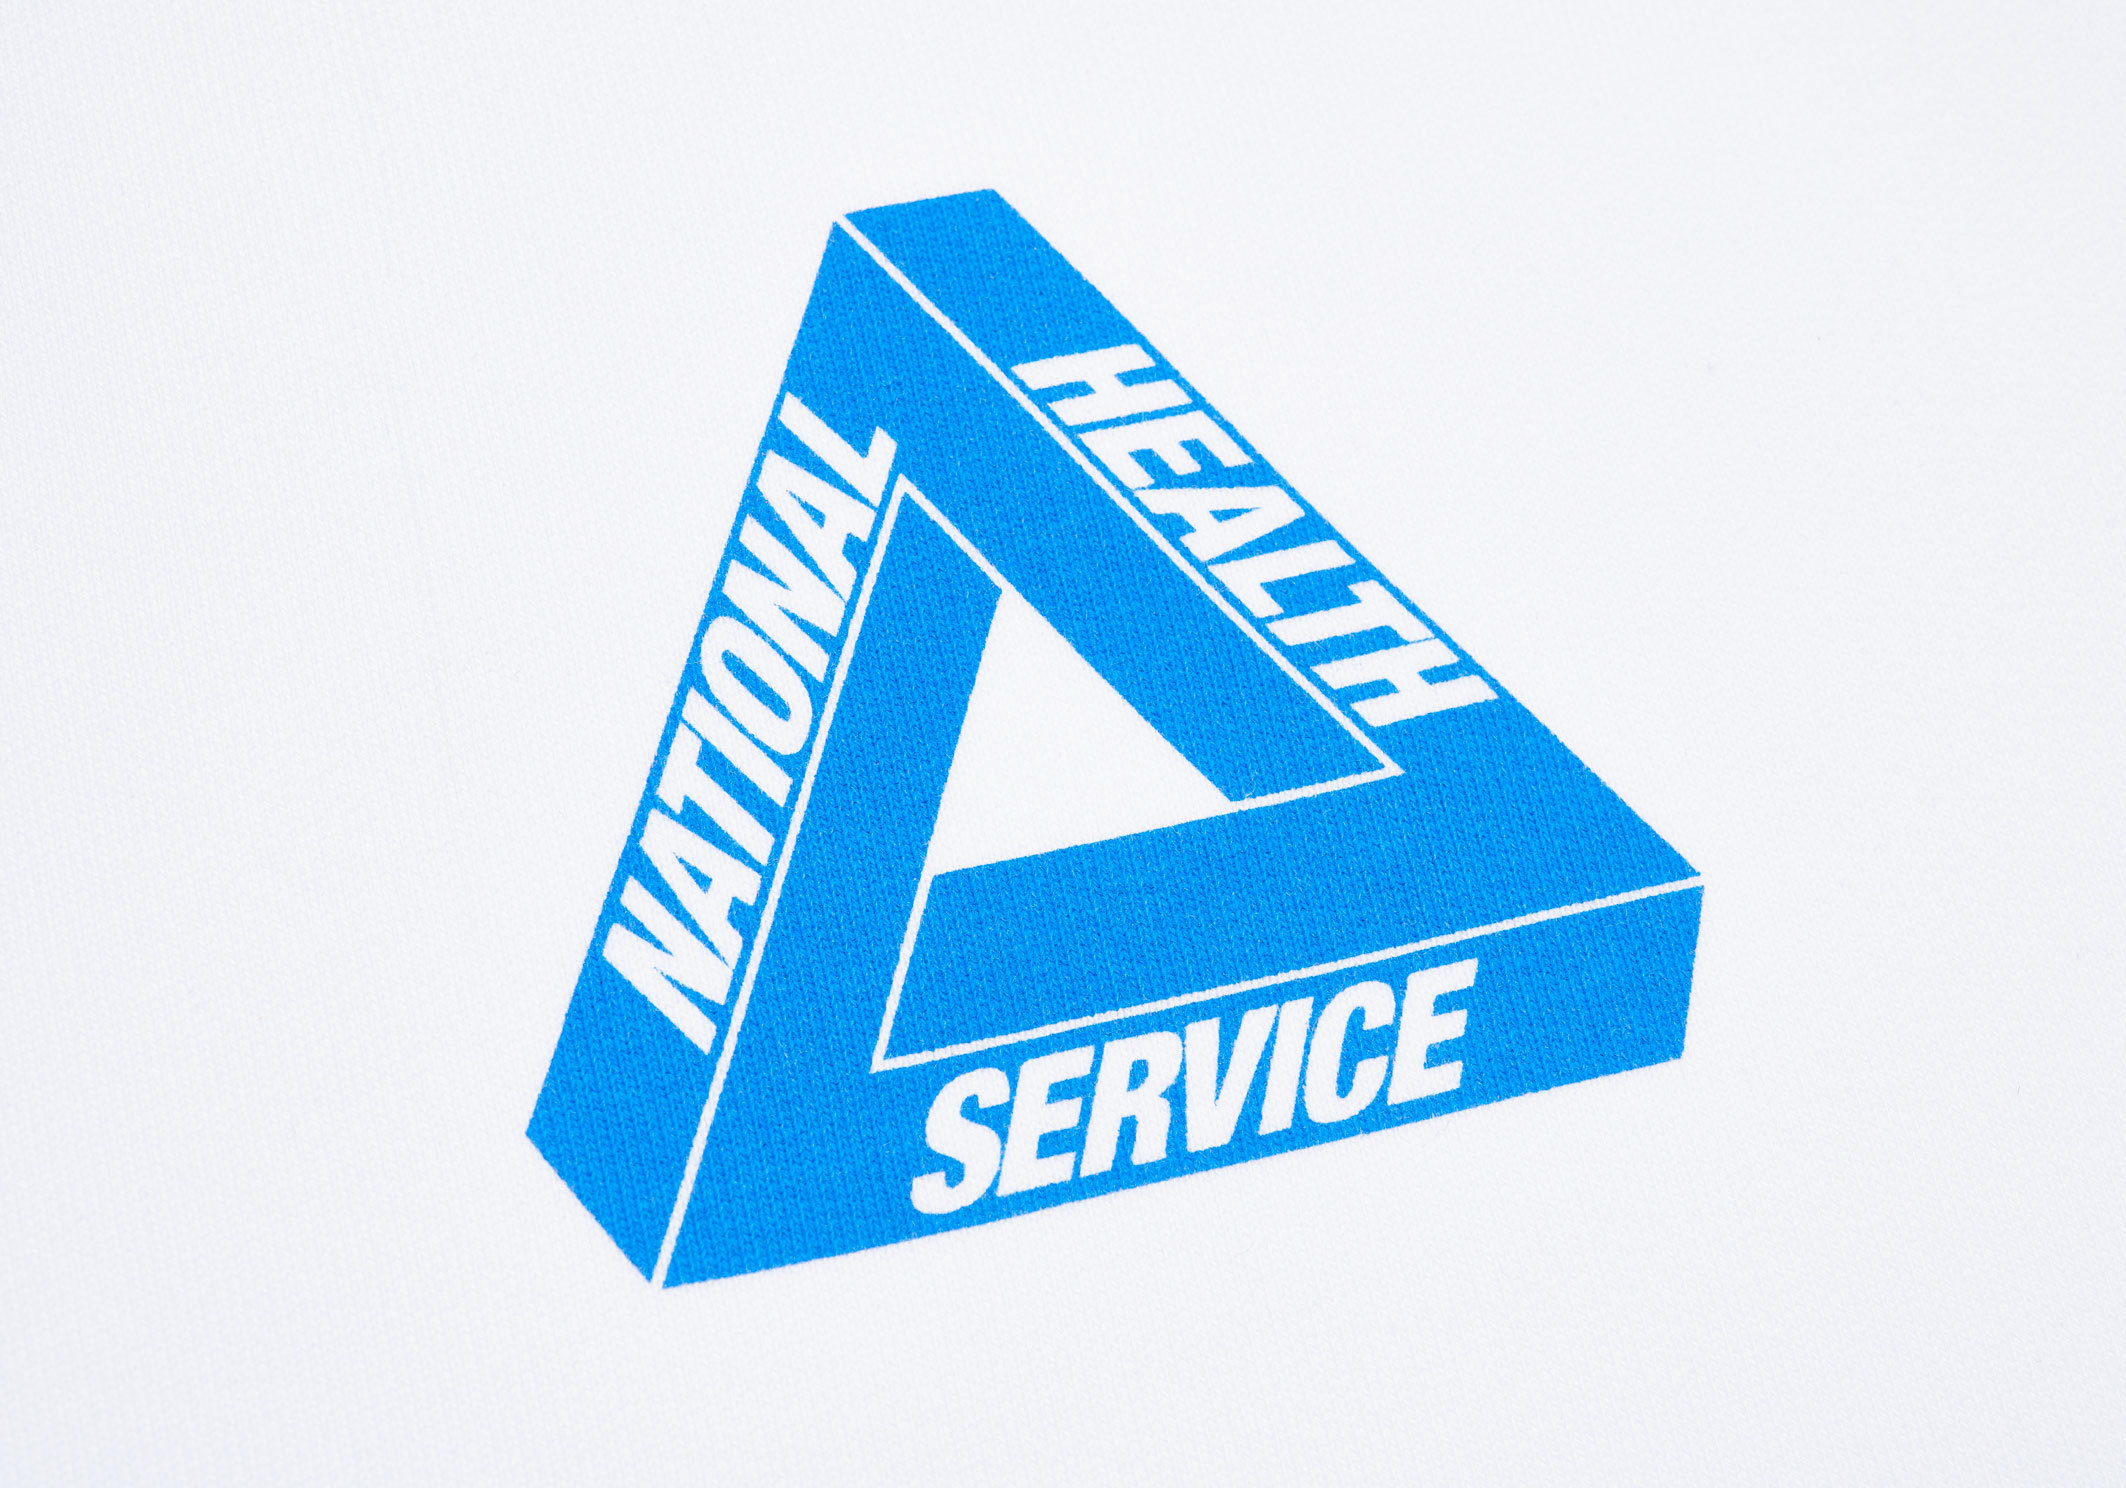 Palace is dropping an NHS charity collection on Friday - The Face